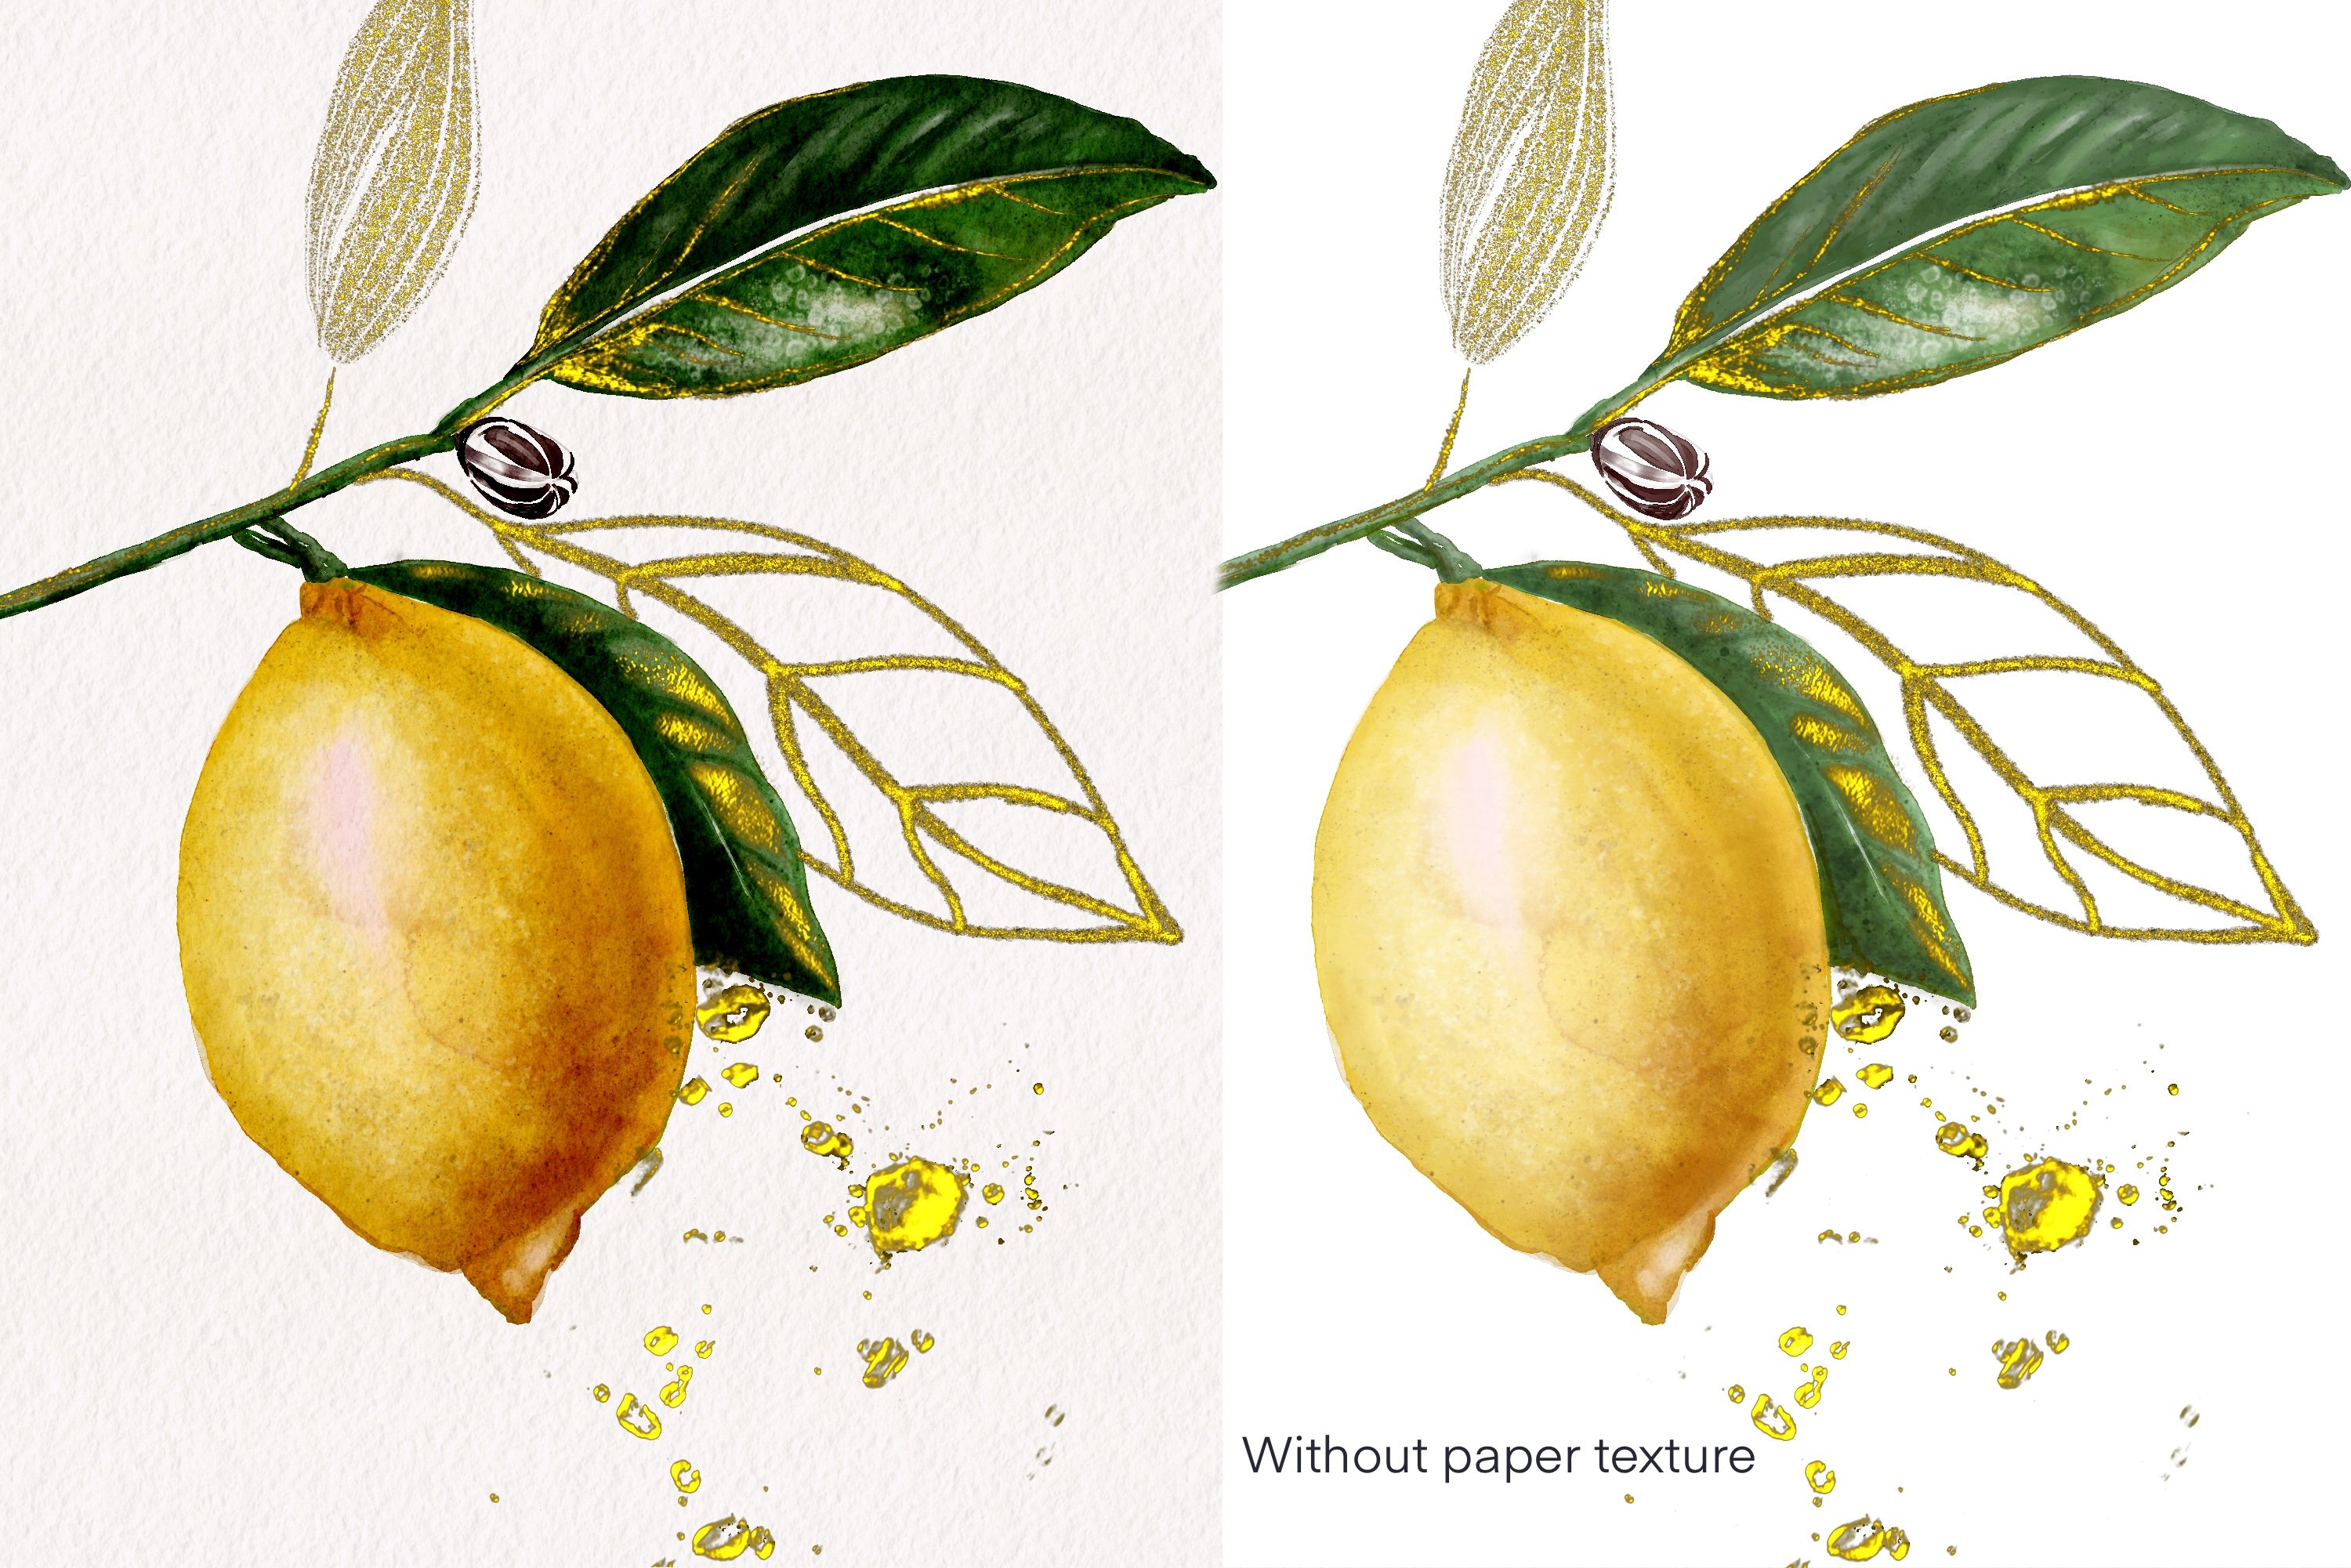 Lemon painted with brushes.